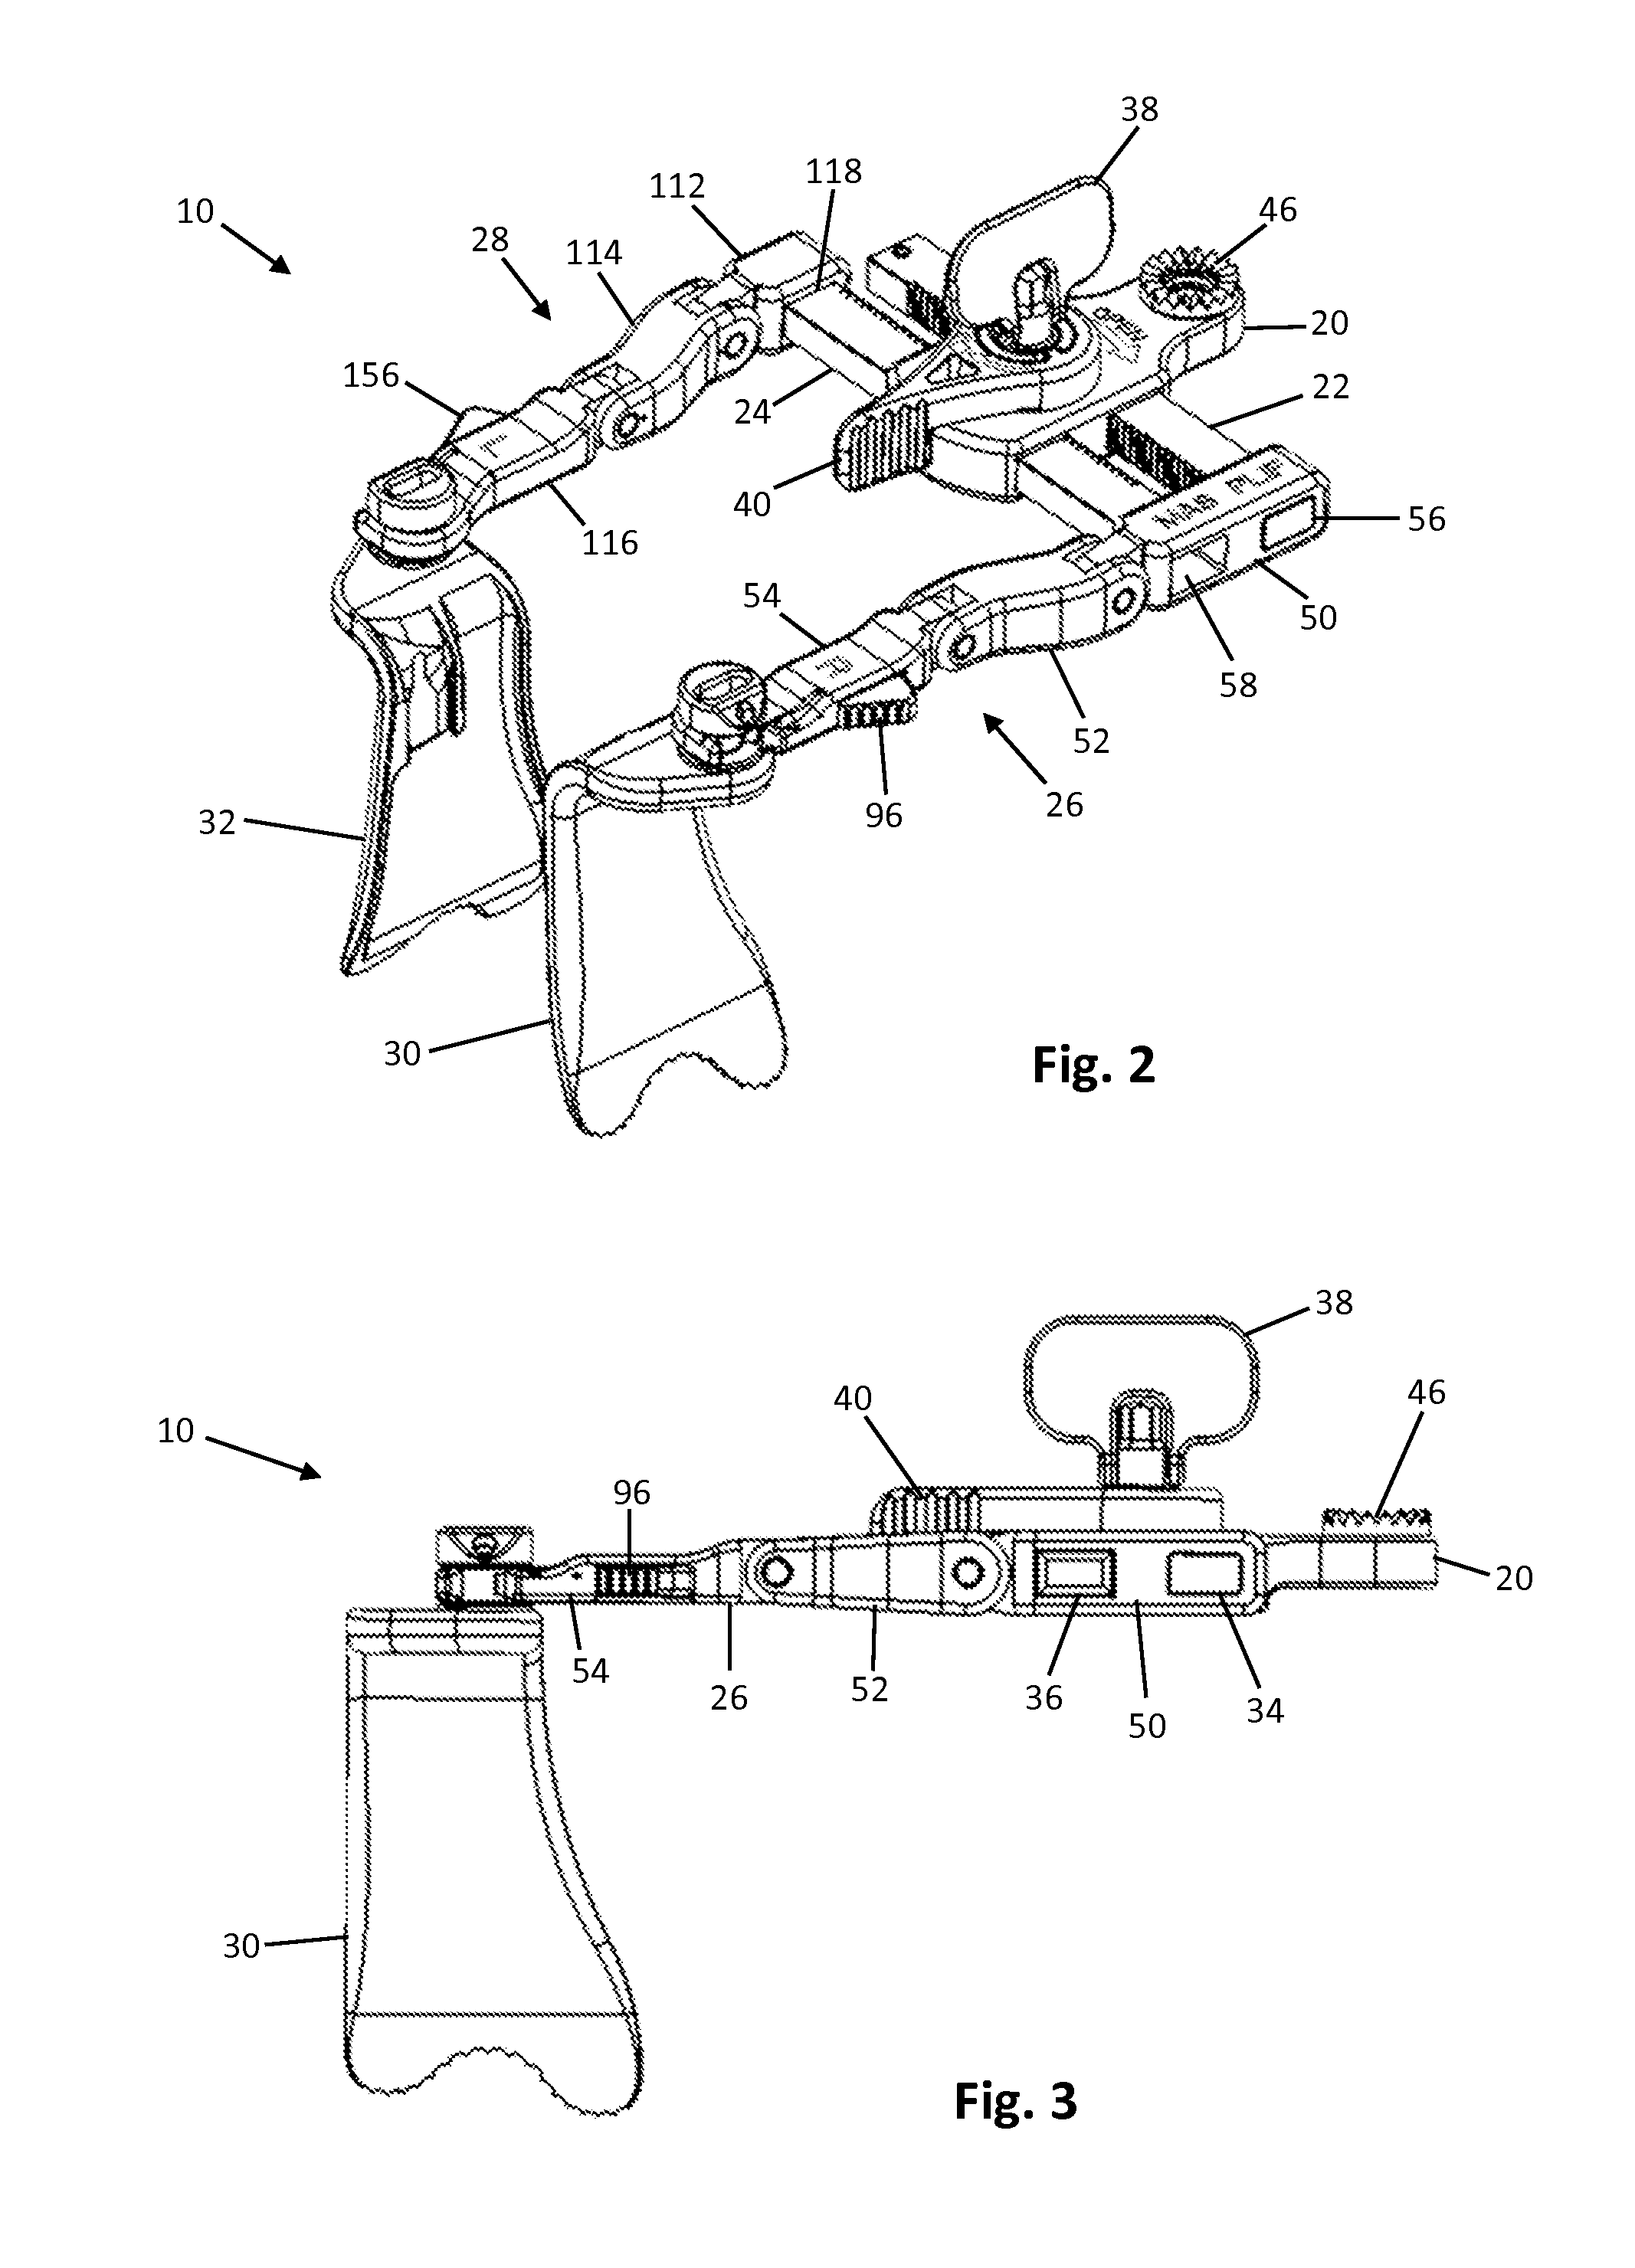 Systems and methods for performing spine surgery